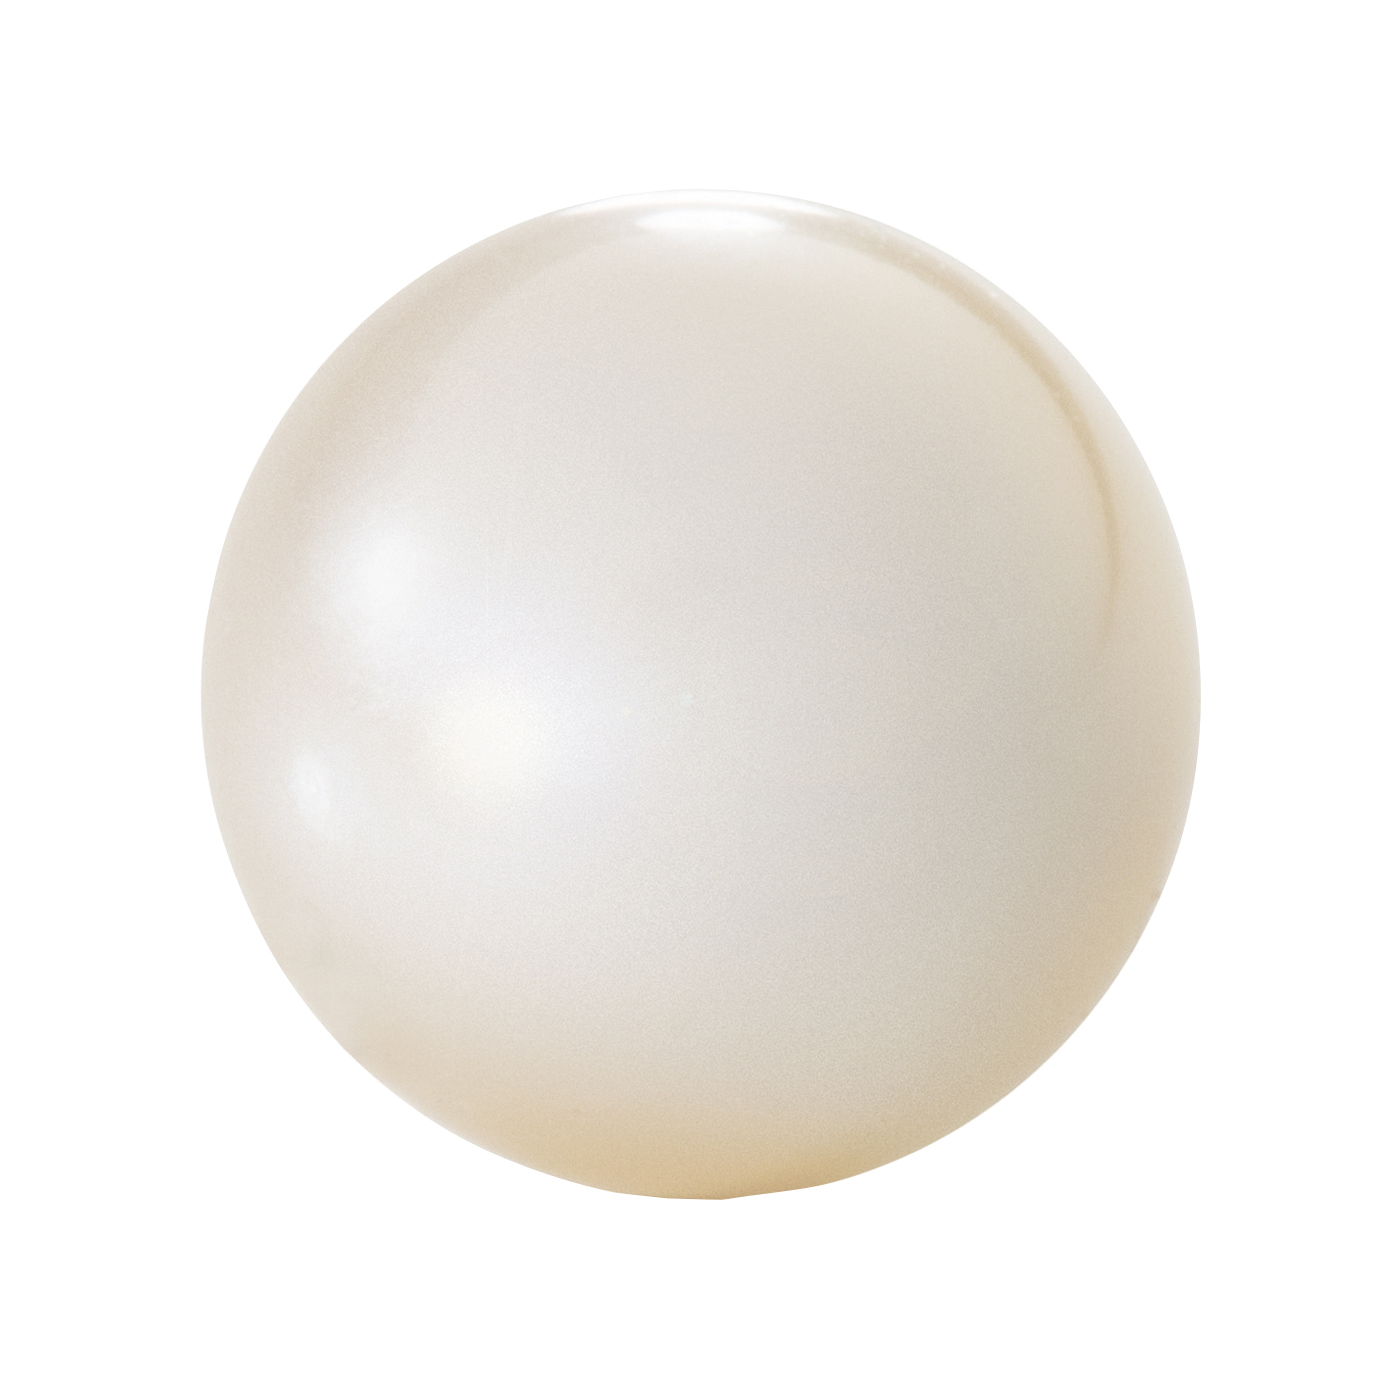 Cultured Pearl, Freshwater, 4/4, ø 5.0-5.5 mm, White - 1 piece